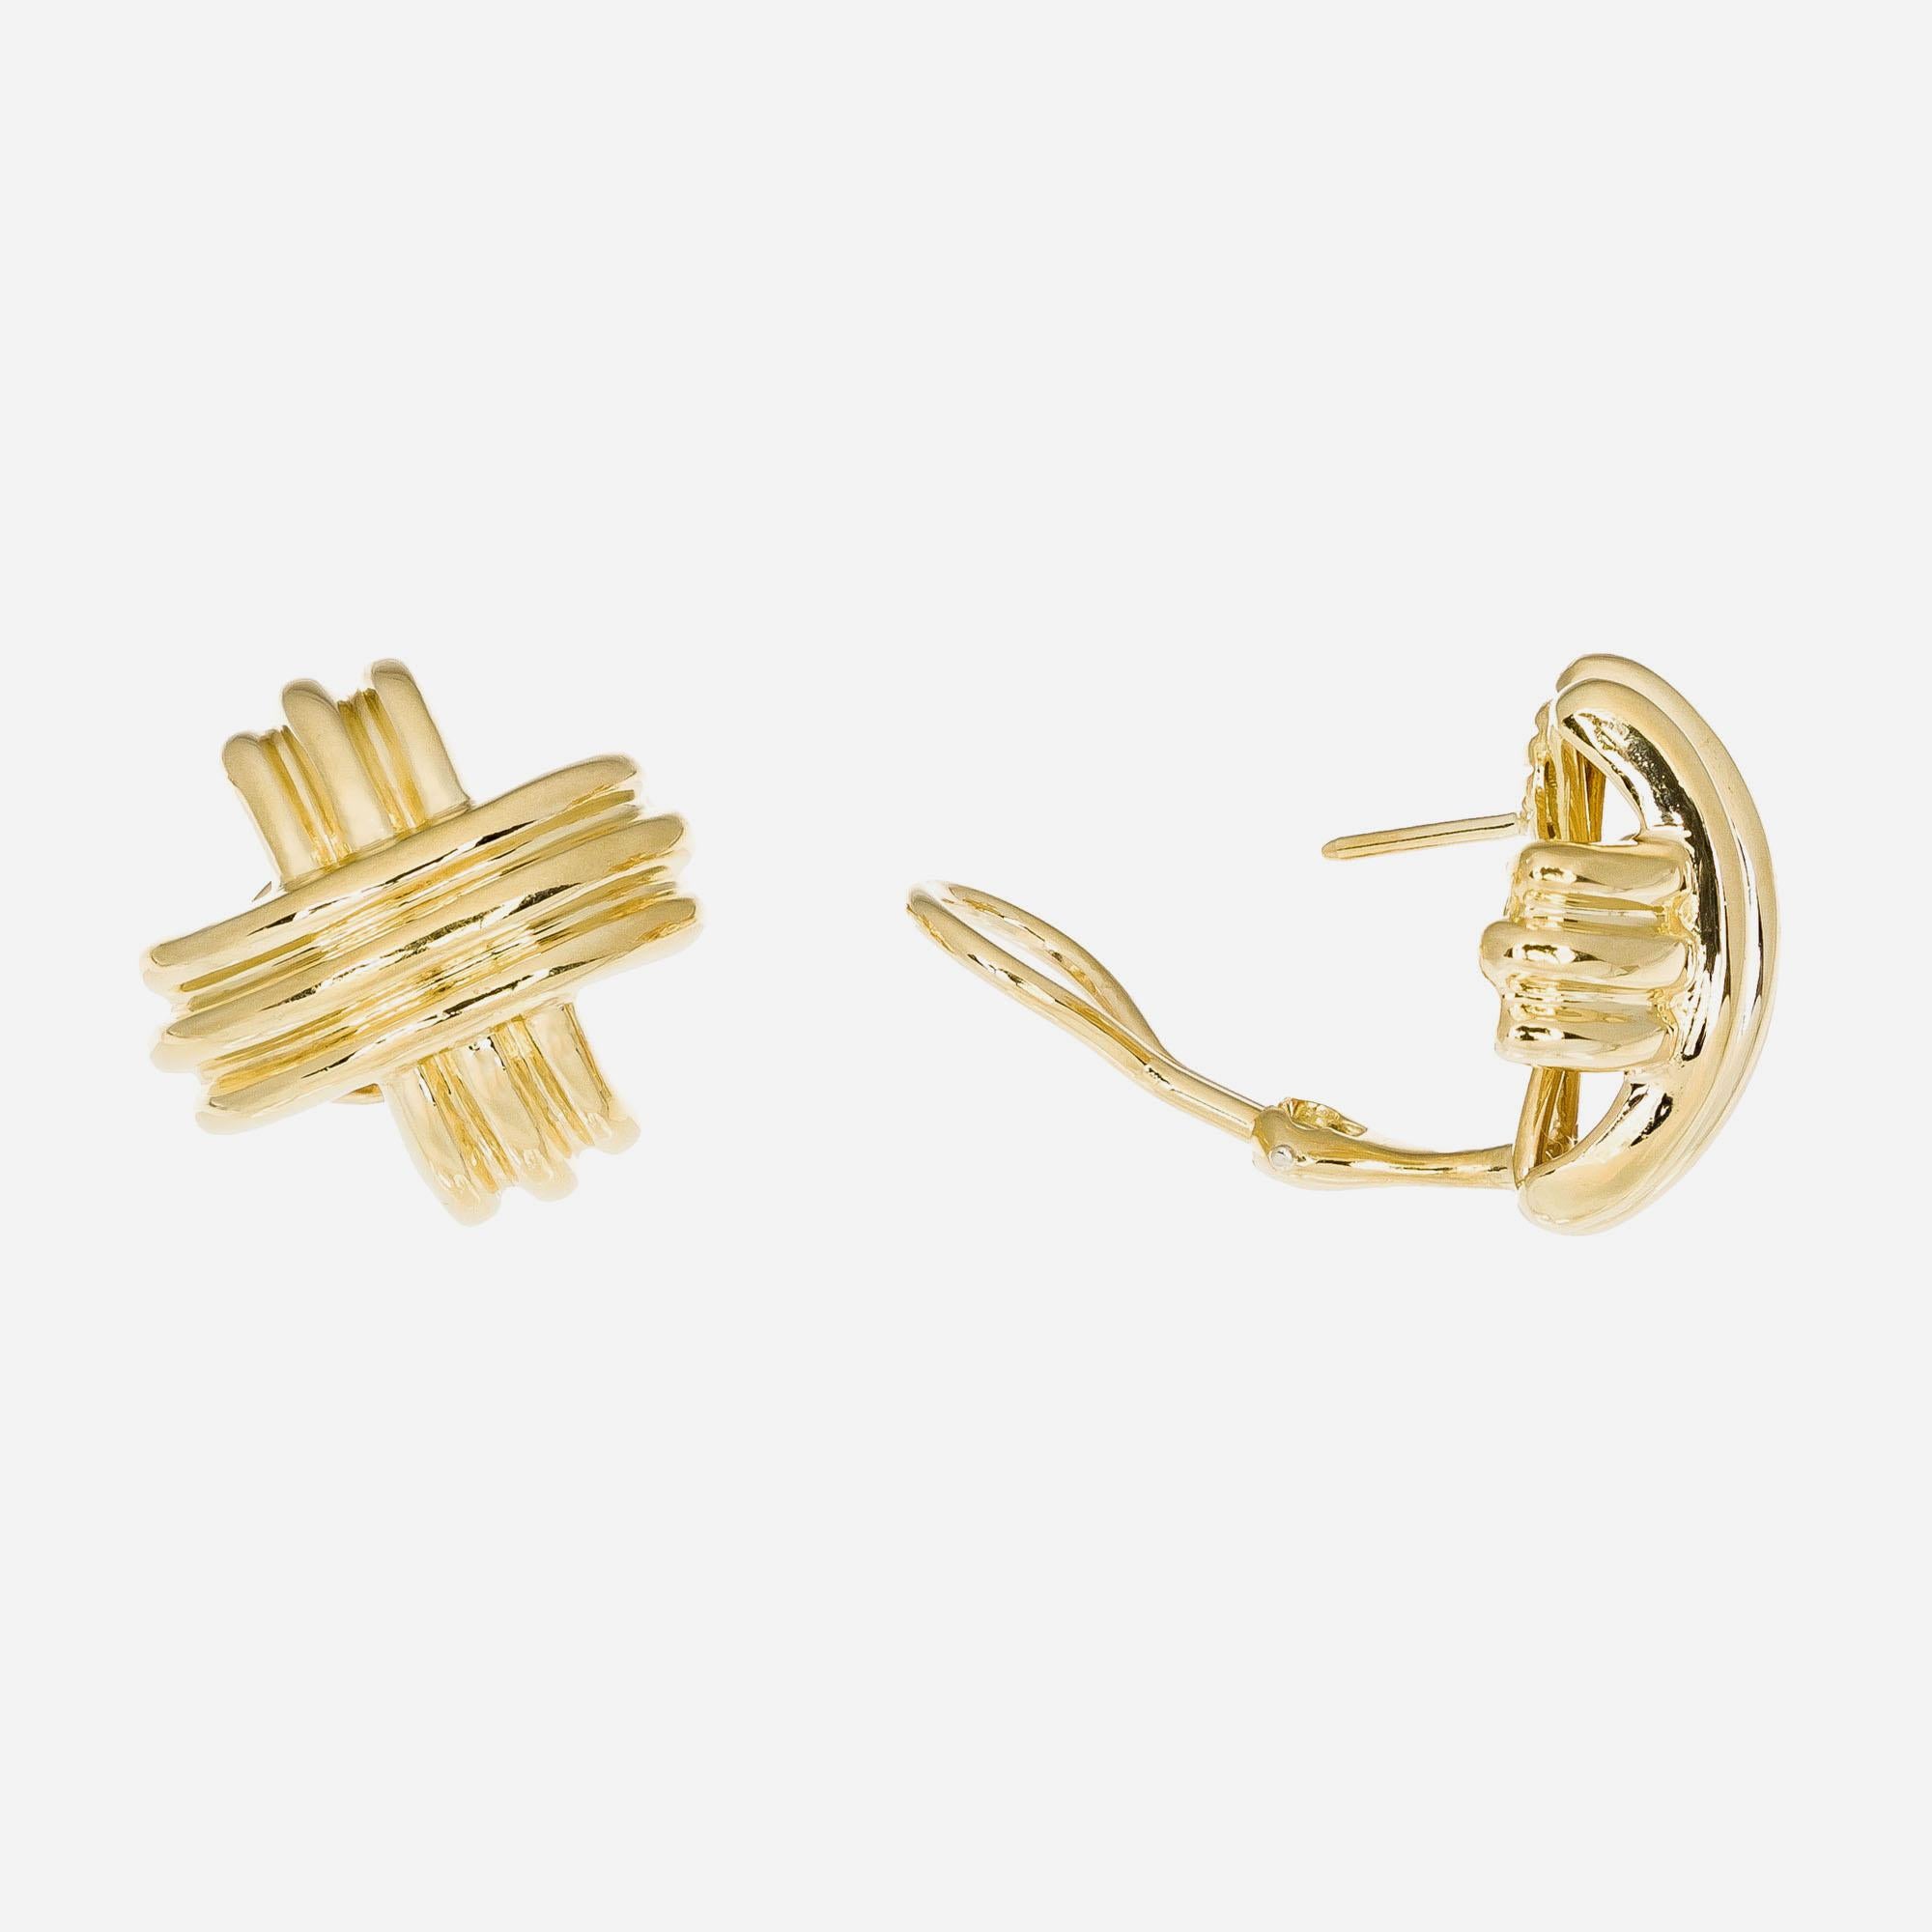 18k yellow gold Tiffany & Co “X” earrings designed in as a cross motif with posts and hinged omega backs signed T + Co and 750

18k yellow gold 
Stamped: 750
Hallmark: T +Co
13.9 grams
Top to bottom: 18.6mm or .75 Inch
Width: 19.5mm or .75